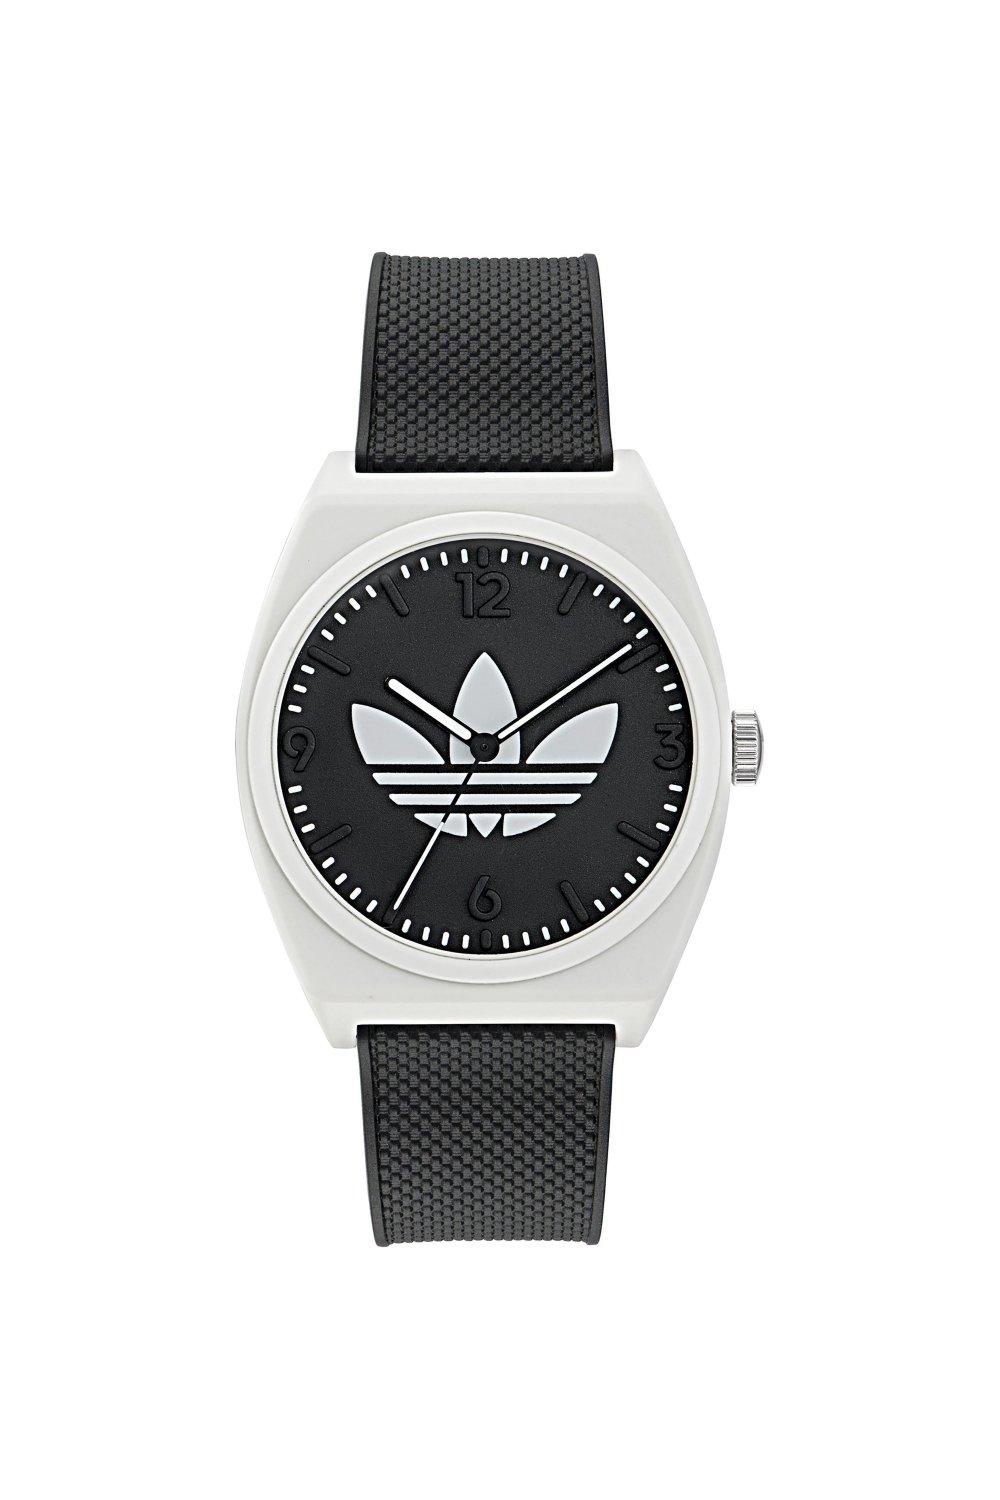 Watches | Project Two Plastic/resin Fashion Analogue Quartz Watch -  Aost23550 | adidas Originals